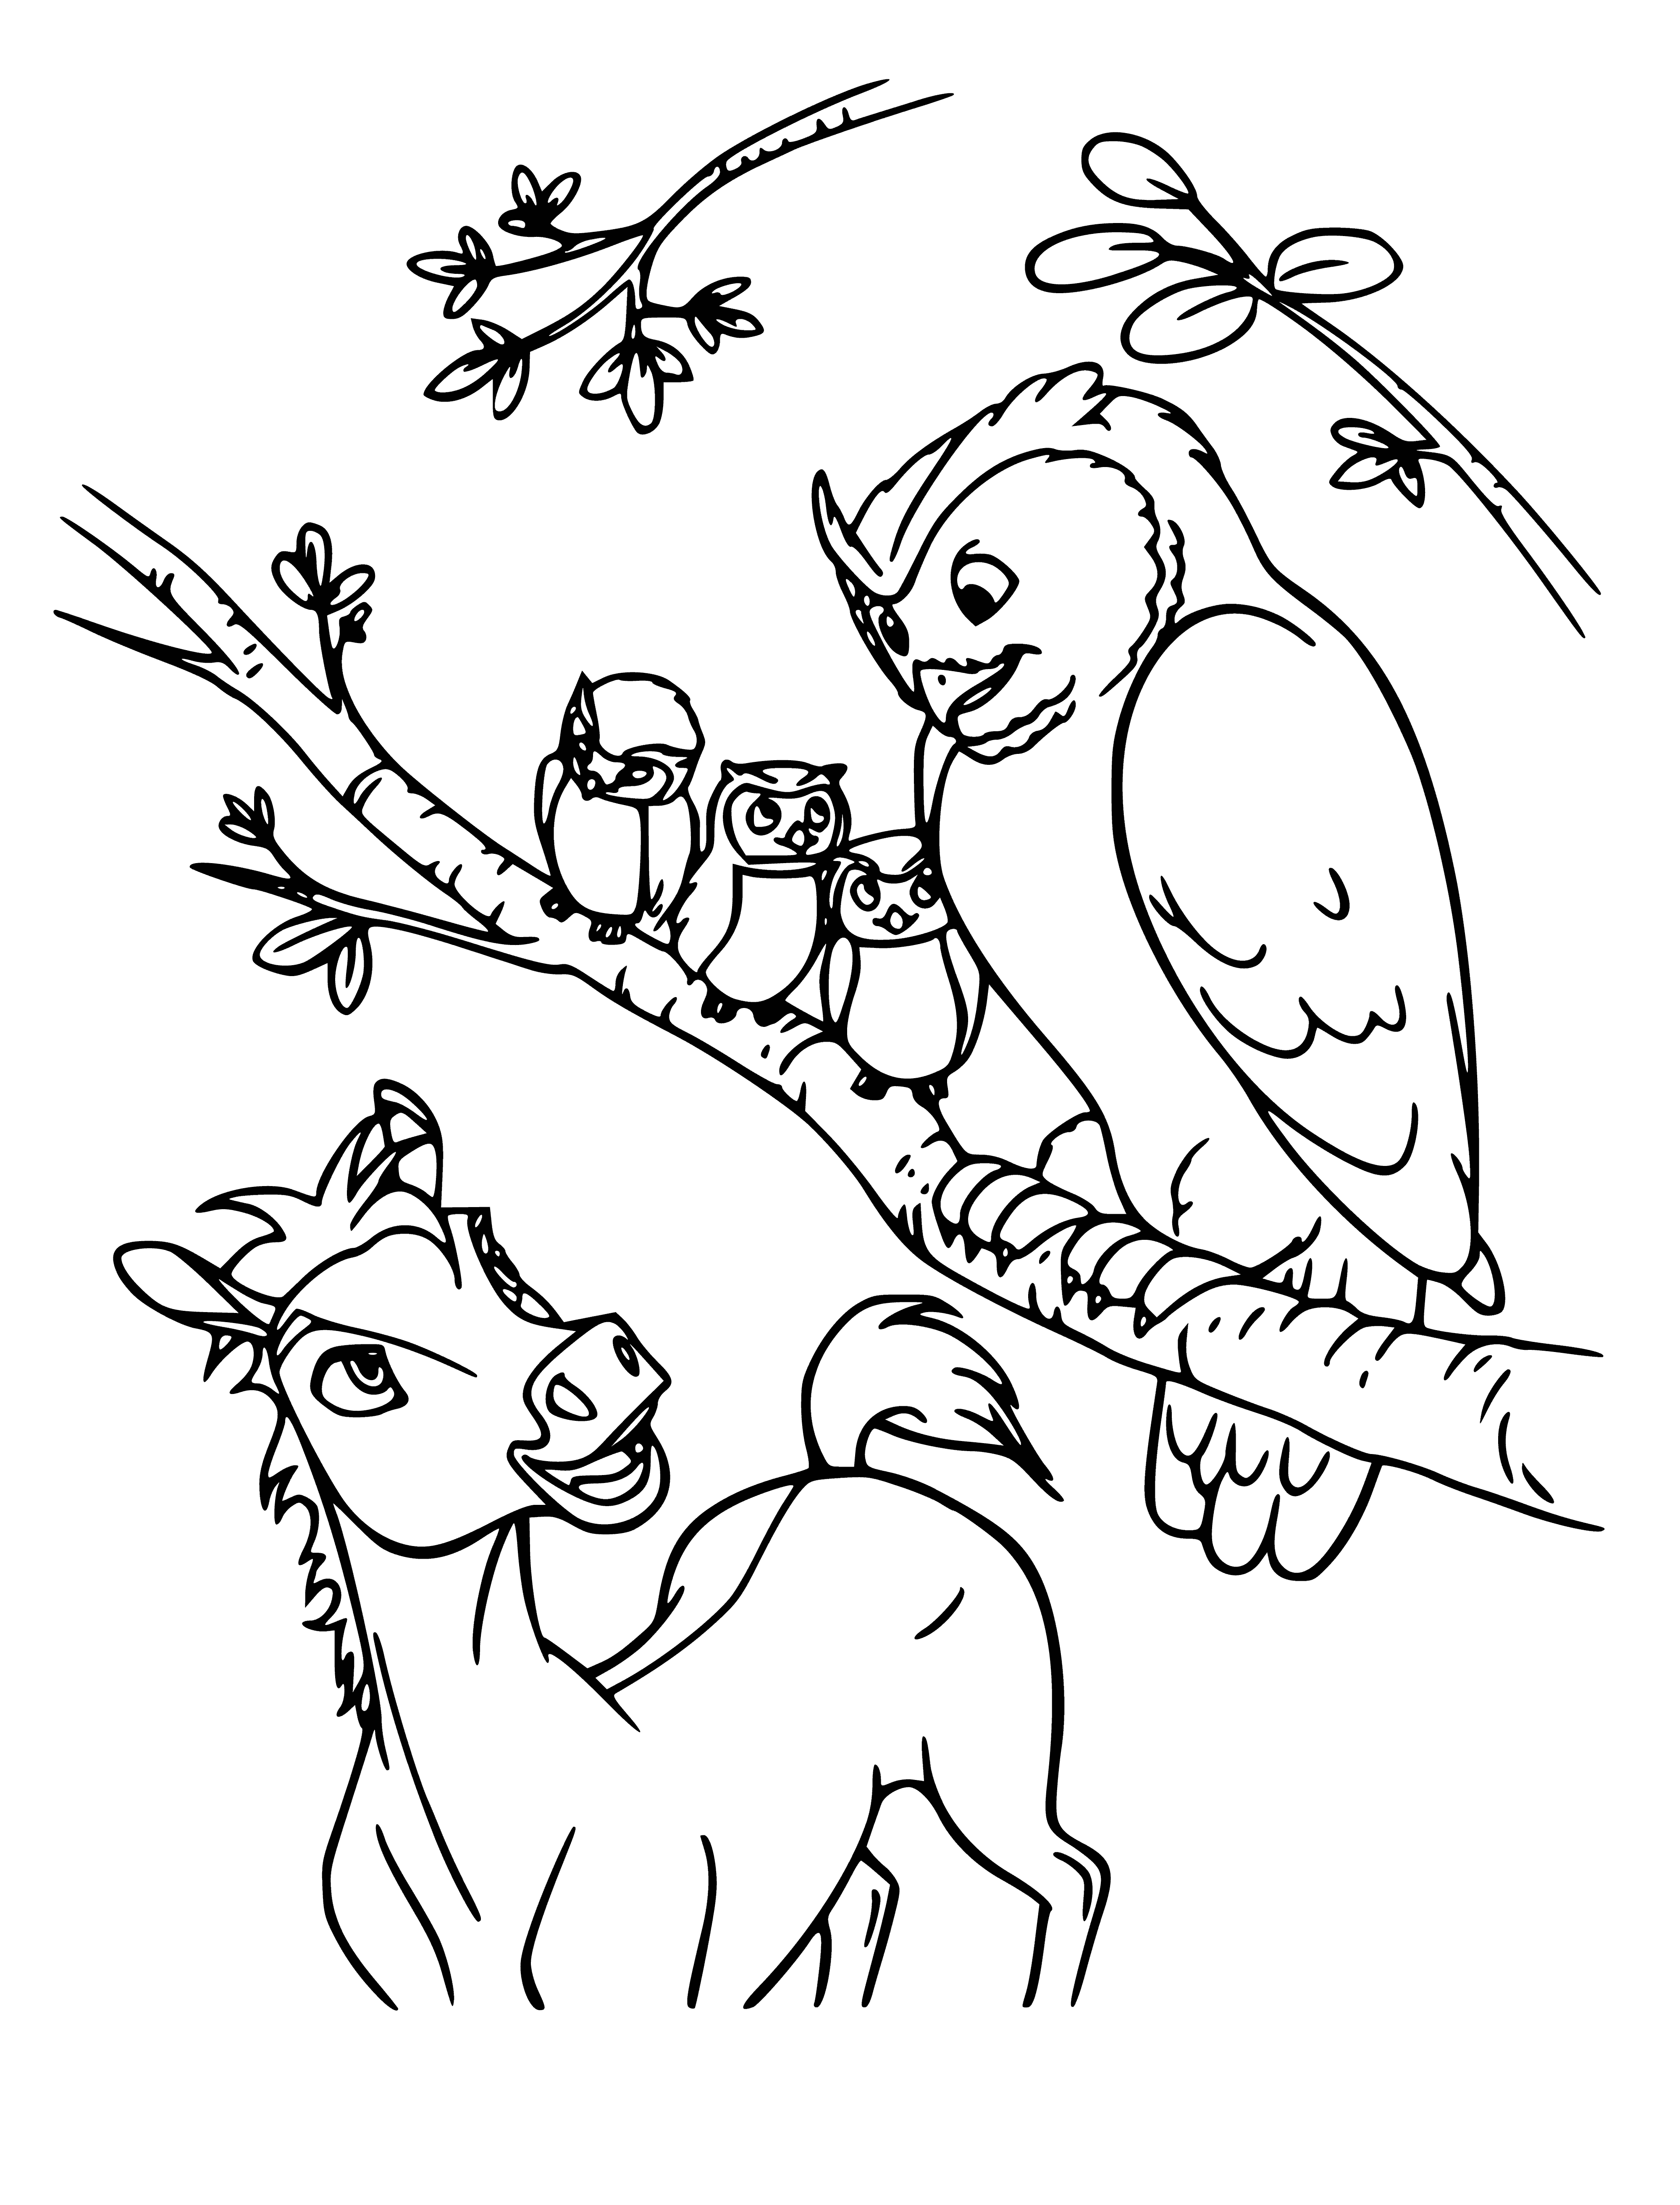 Friends of Spirit coloring page